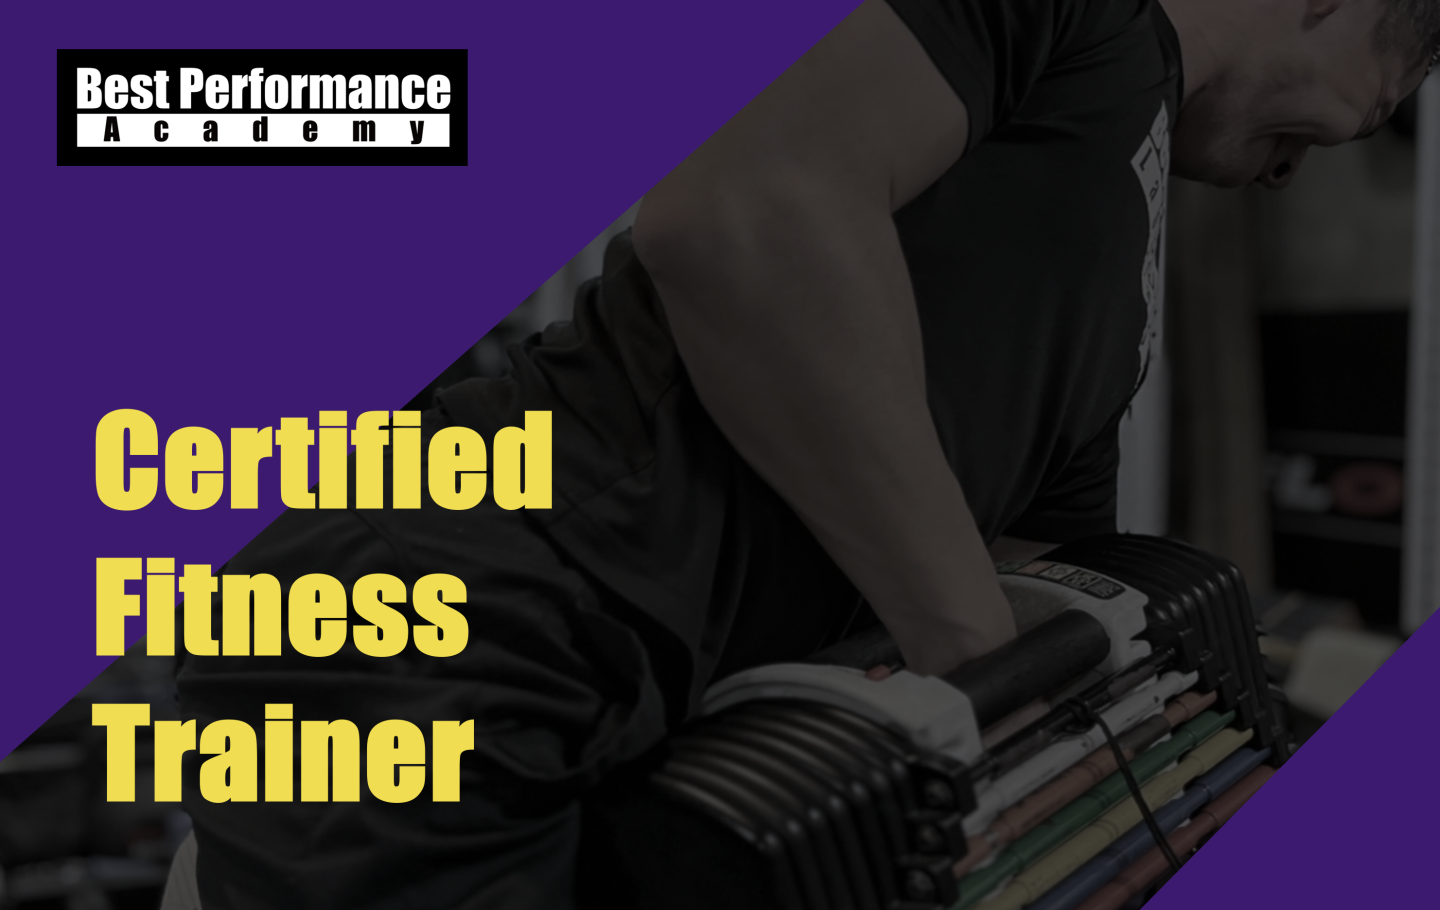 BPA-CFT(Certified Fitness Trainer)	